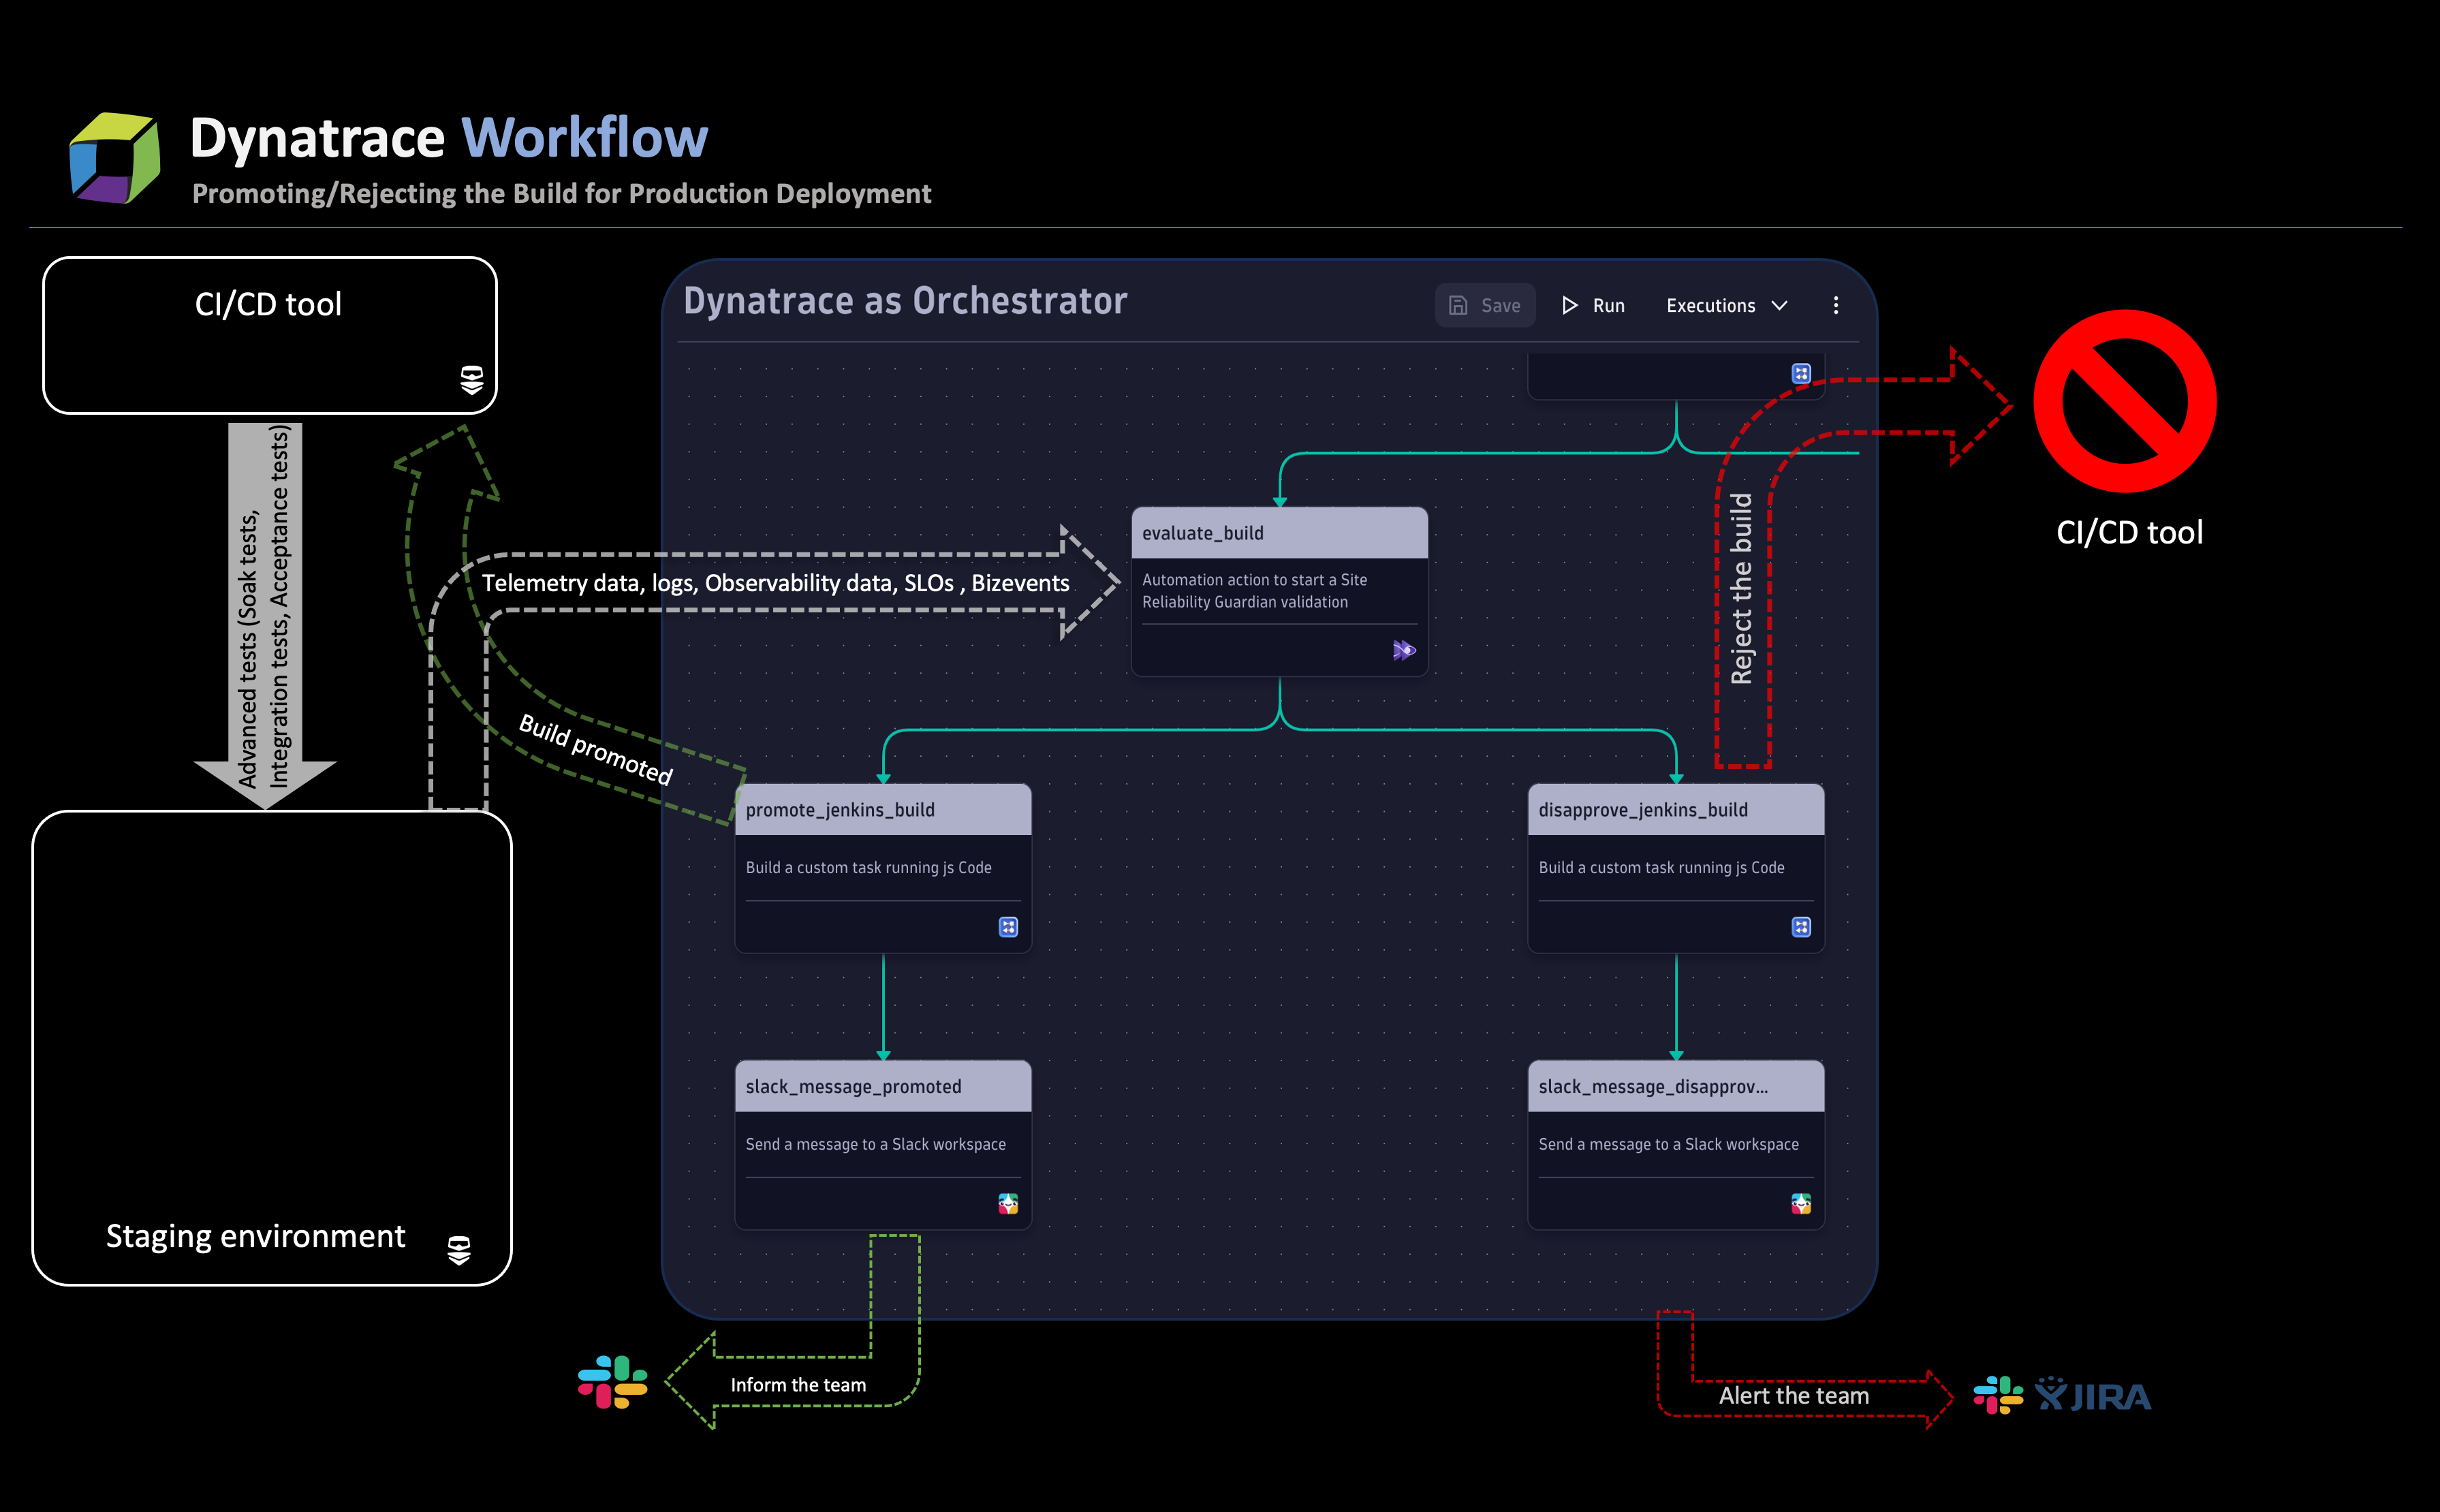 Promoting or rejecting the build for production deployment with Dynatrace workflow